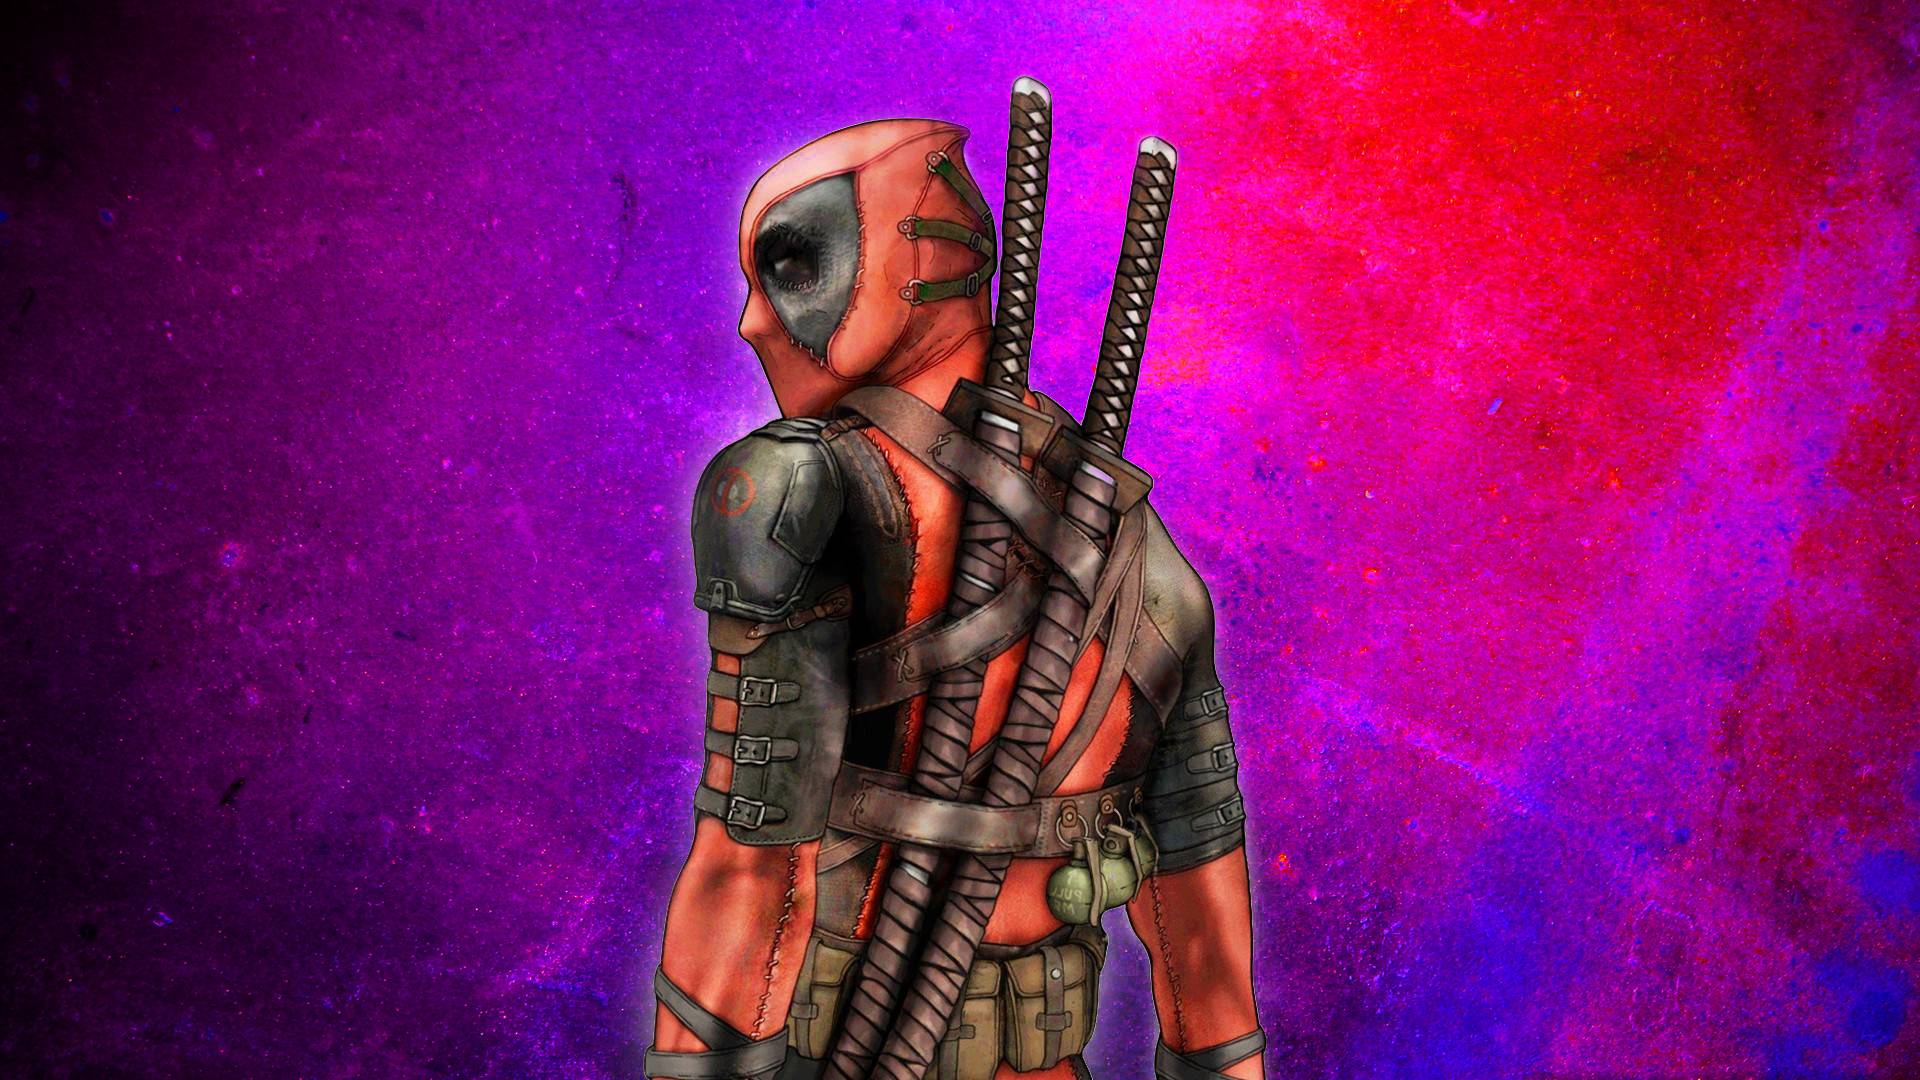 deadpool wallpaper,fictional character,cg artwork,screenshot,massively multiplayer online role playing game